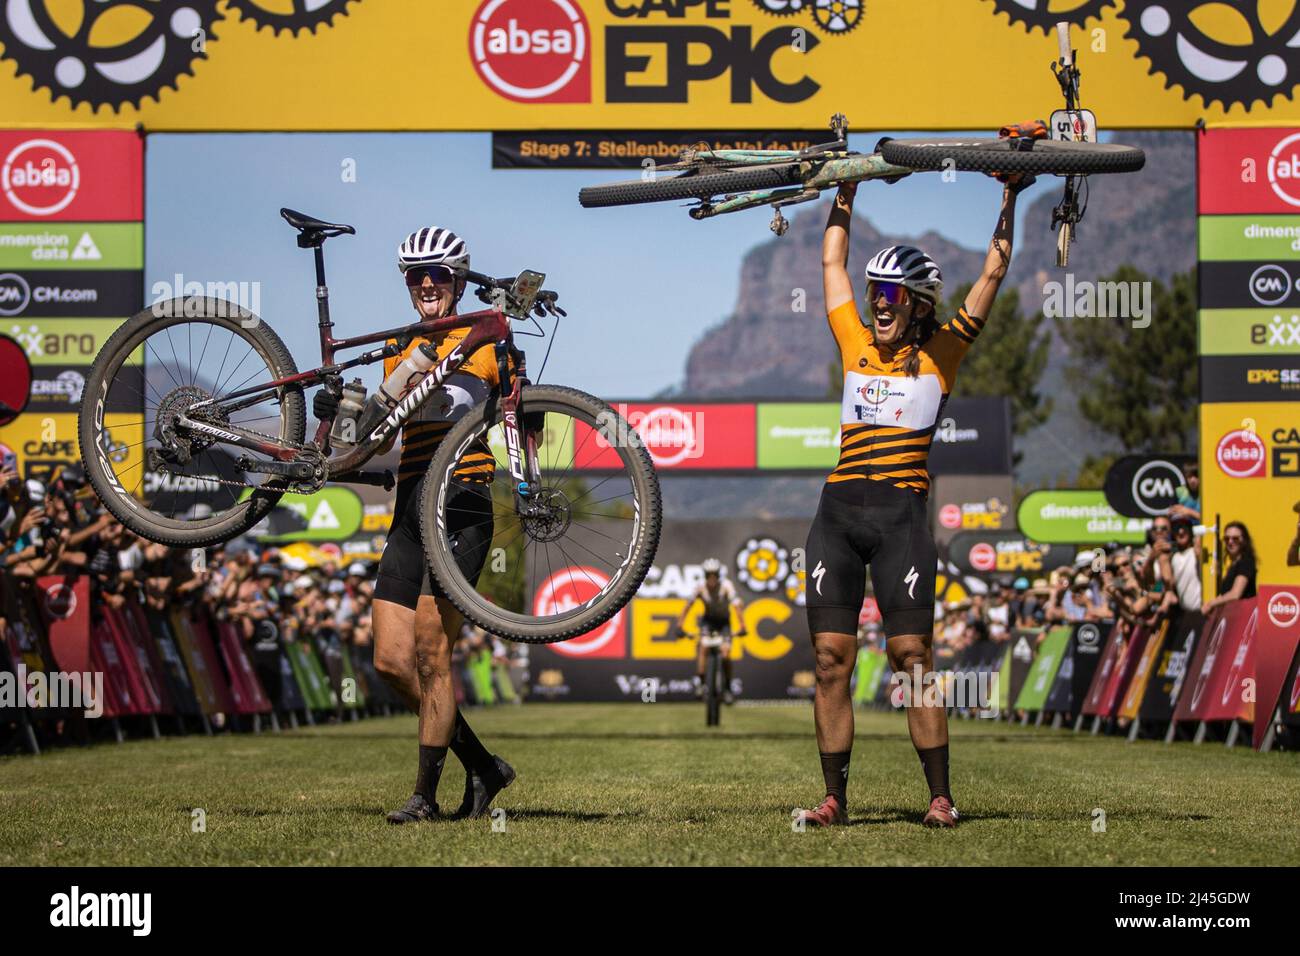 US/ARG bikers Haley Batten and Sofia Gomez Villafane celebrates victory in women doubles race of the Cape Epic in South Africa, March 27, 2022. (CTK P Stock Photo